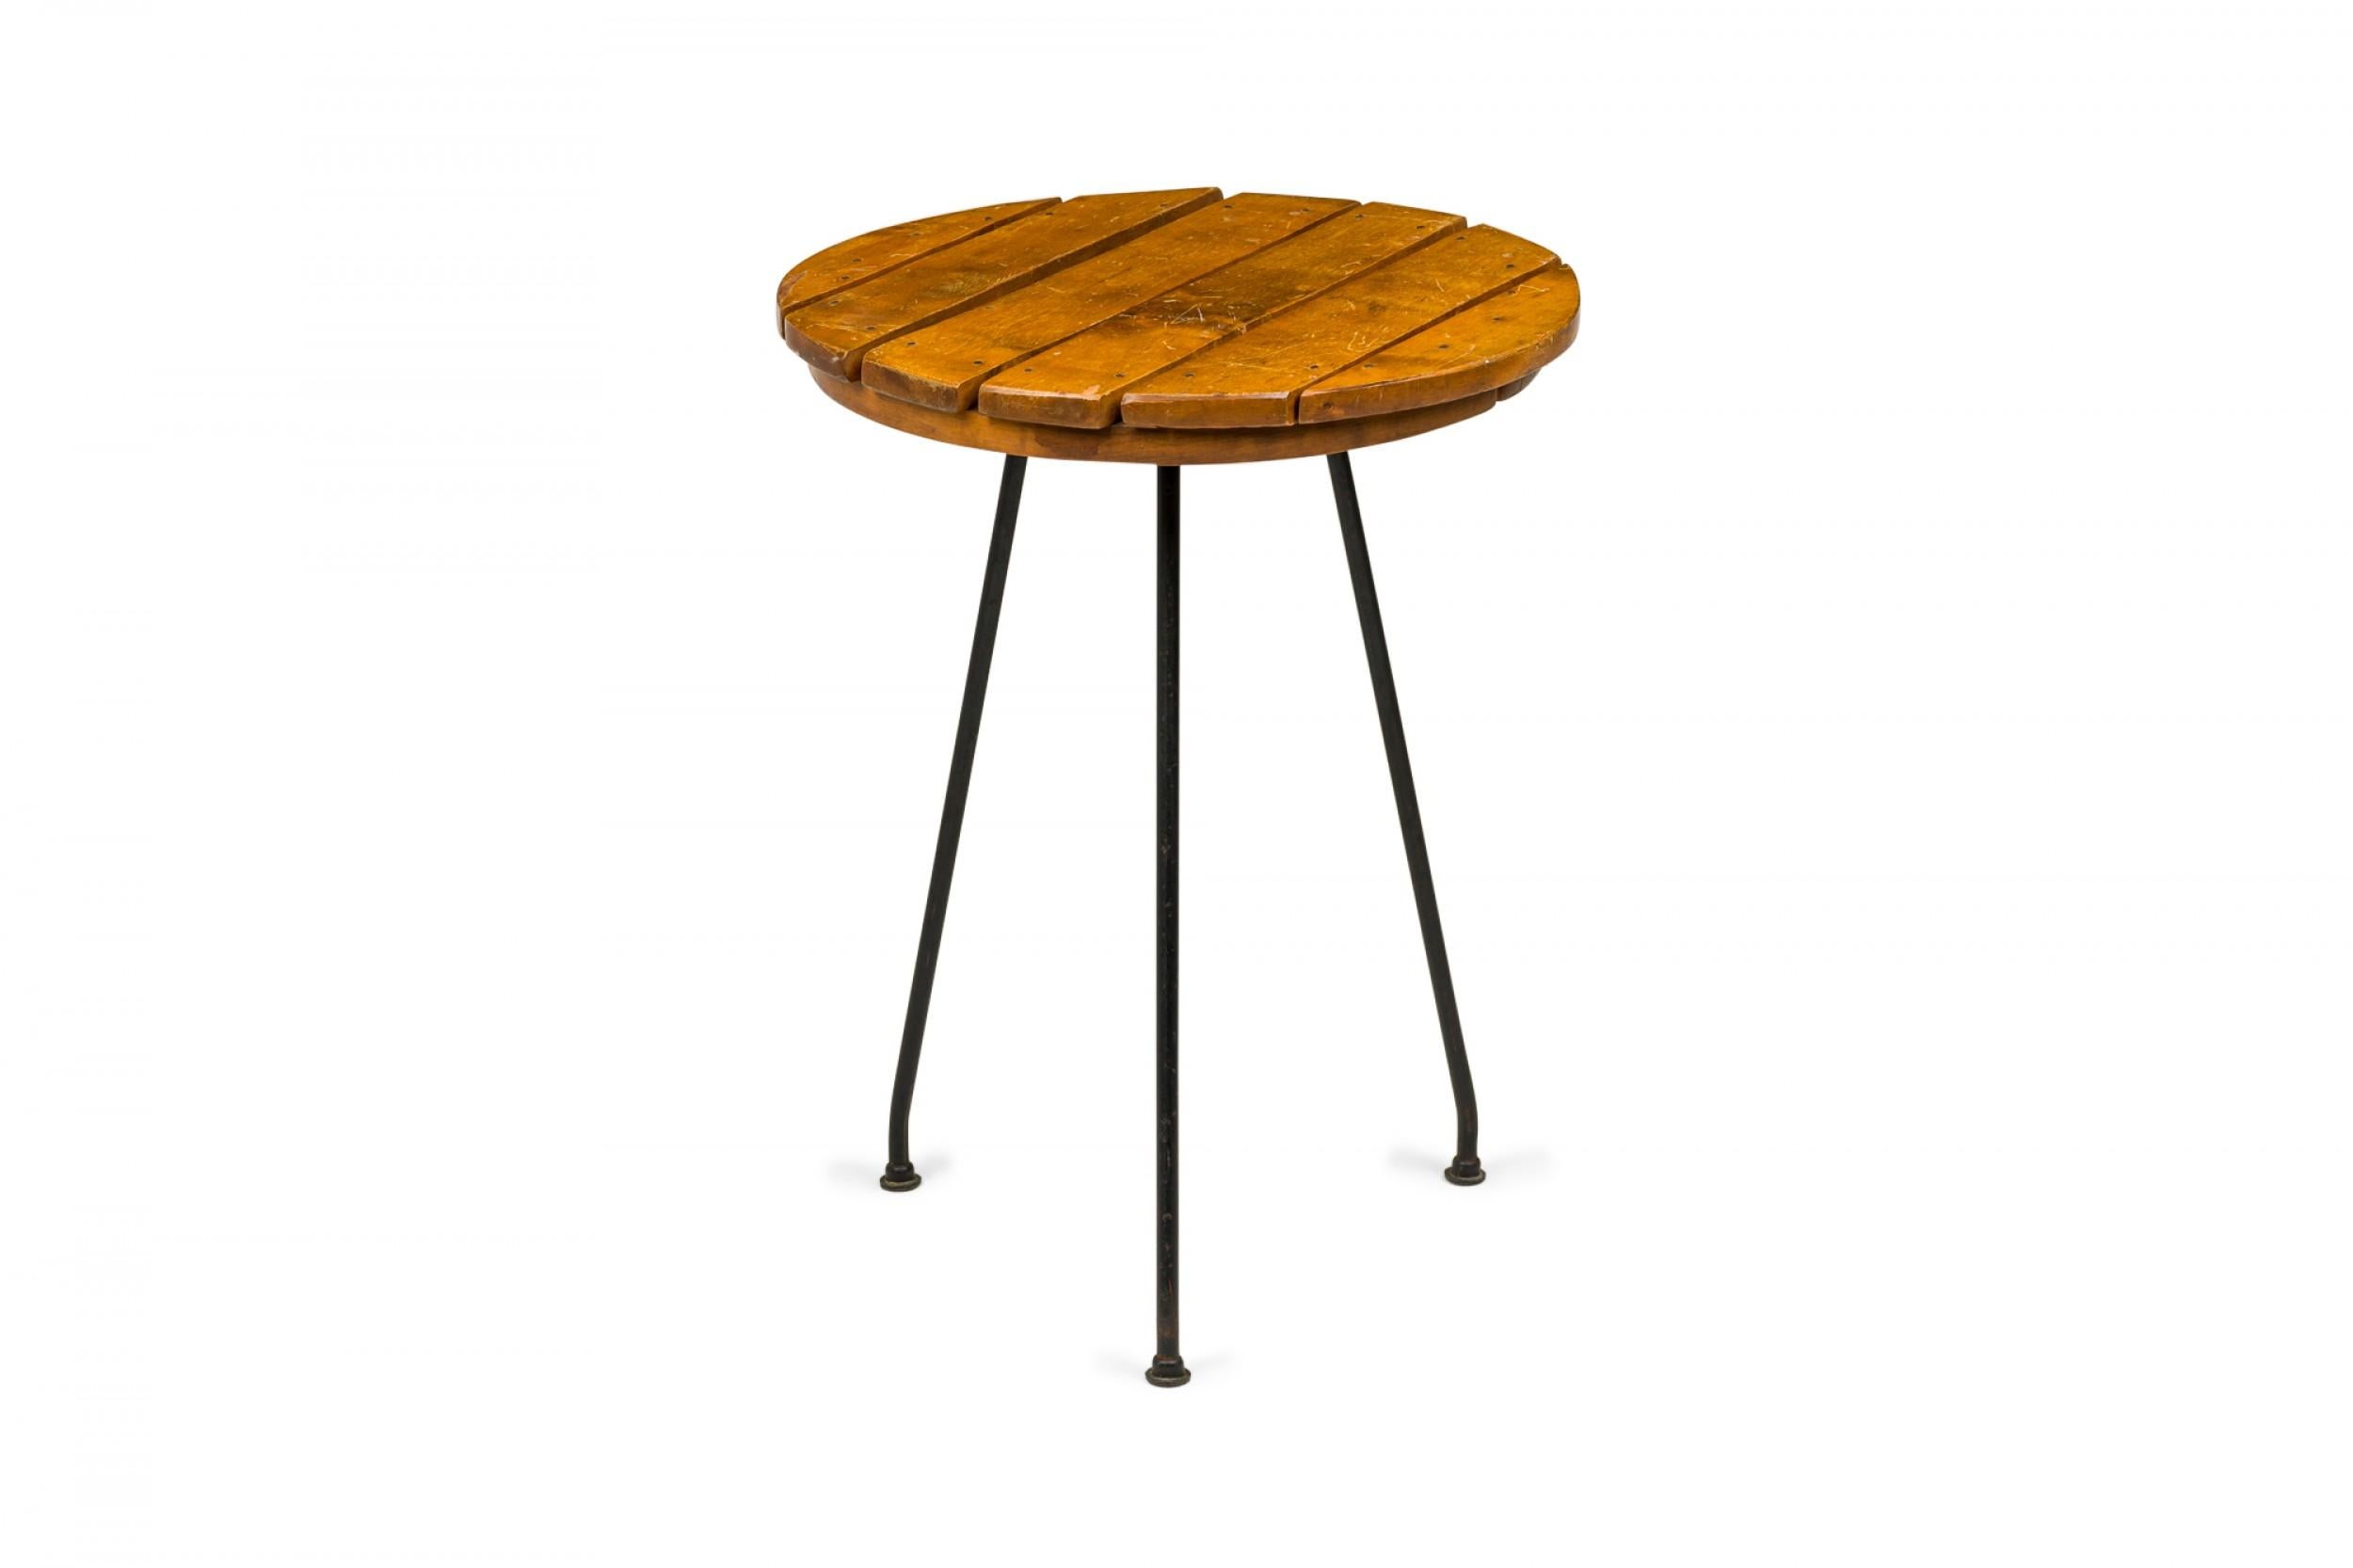 American mid-century circular end / side table with a wooden slat top resting on three angled black iron legs. (TONY PAUL)